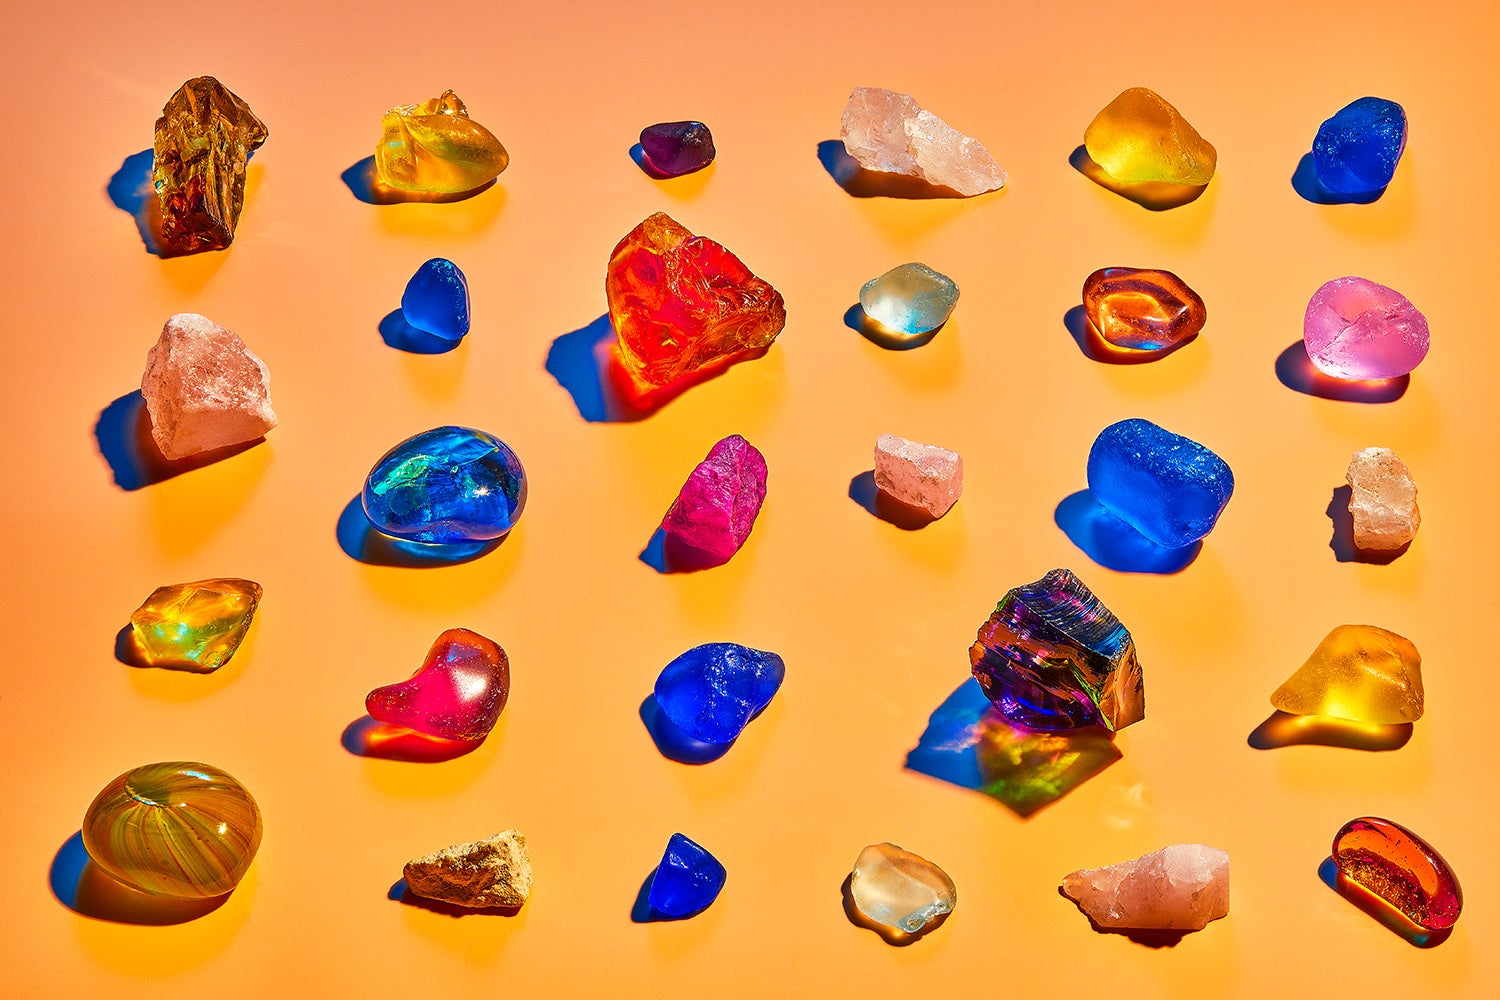 neatly arranged rows of colorful items purporting to be crystals